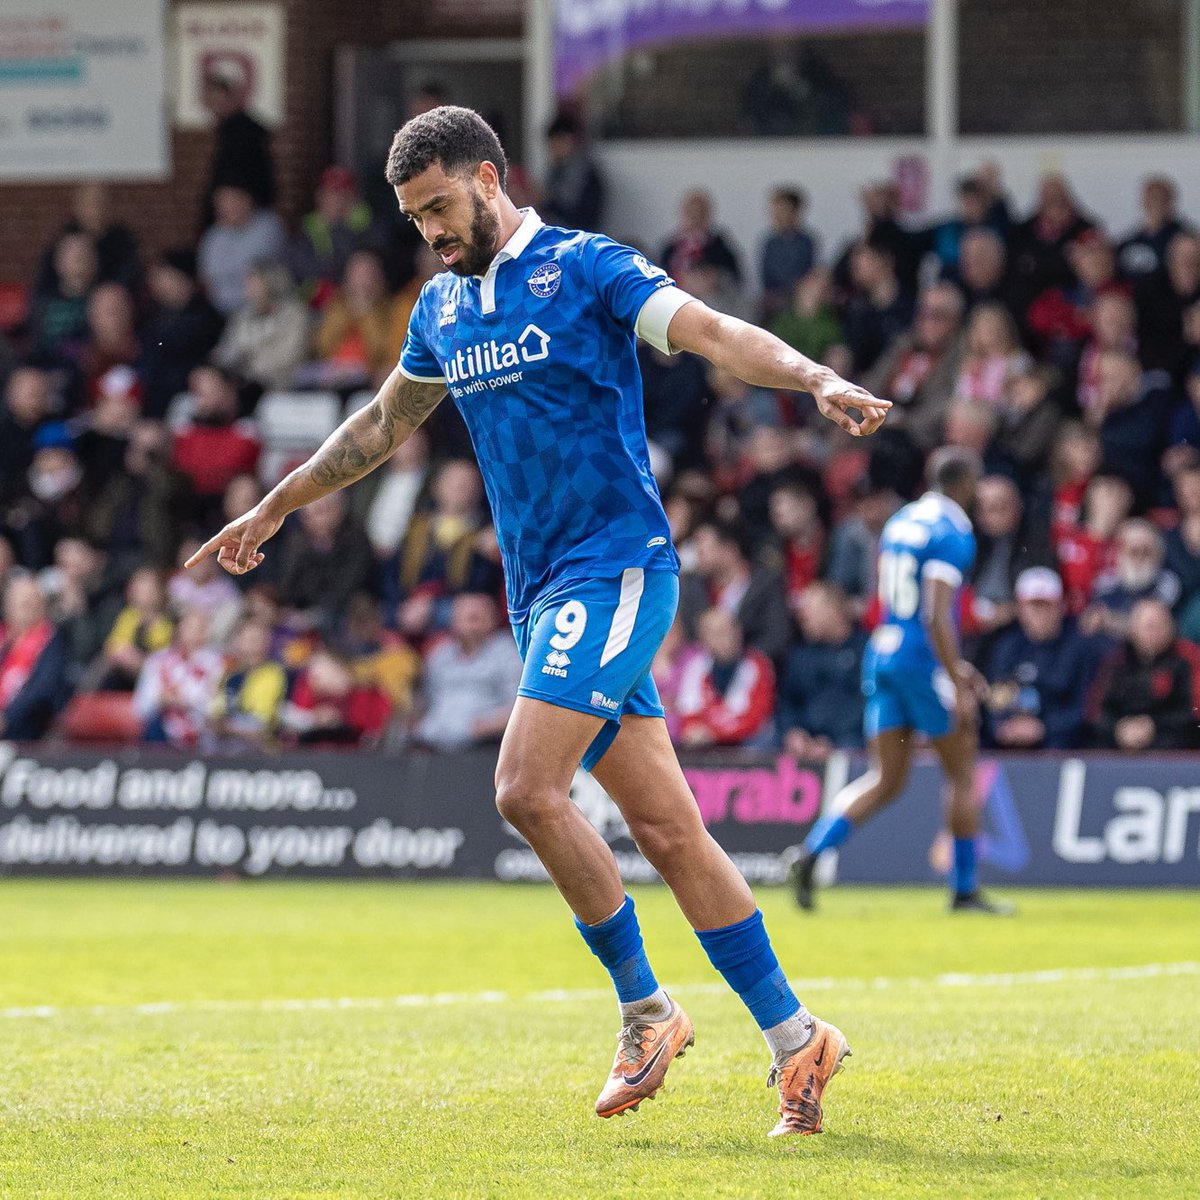 Paul McCallum ends as the top goalscorer in the National League this season🥇 He grabbed 𝟑𝟏 𝐠𝐨𝐚𝐥𝐬 𝐢𝐧 𝟑𝟖 𝐠𝐚𝐦𝐞𝐬 scoring with every 2.83 shots he took ⚽️ 📸 @_GSPhotography #TheVanarama | #SpitFires